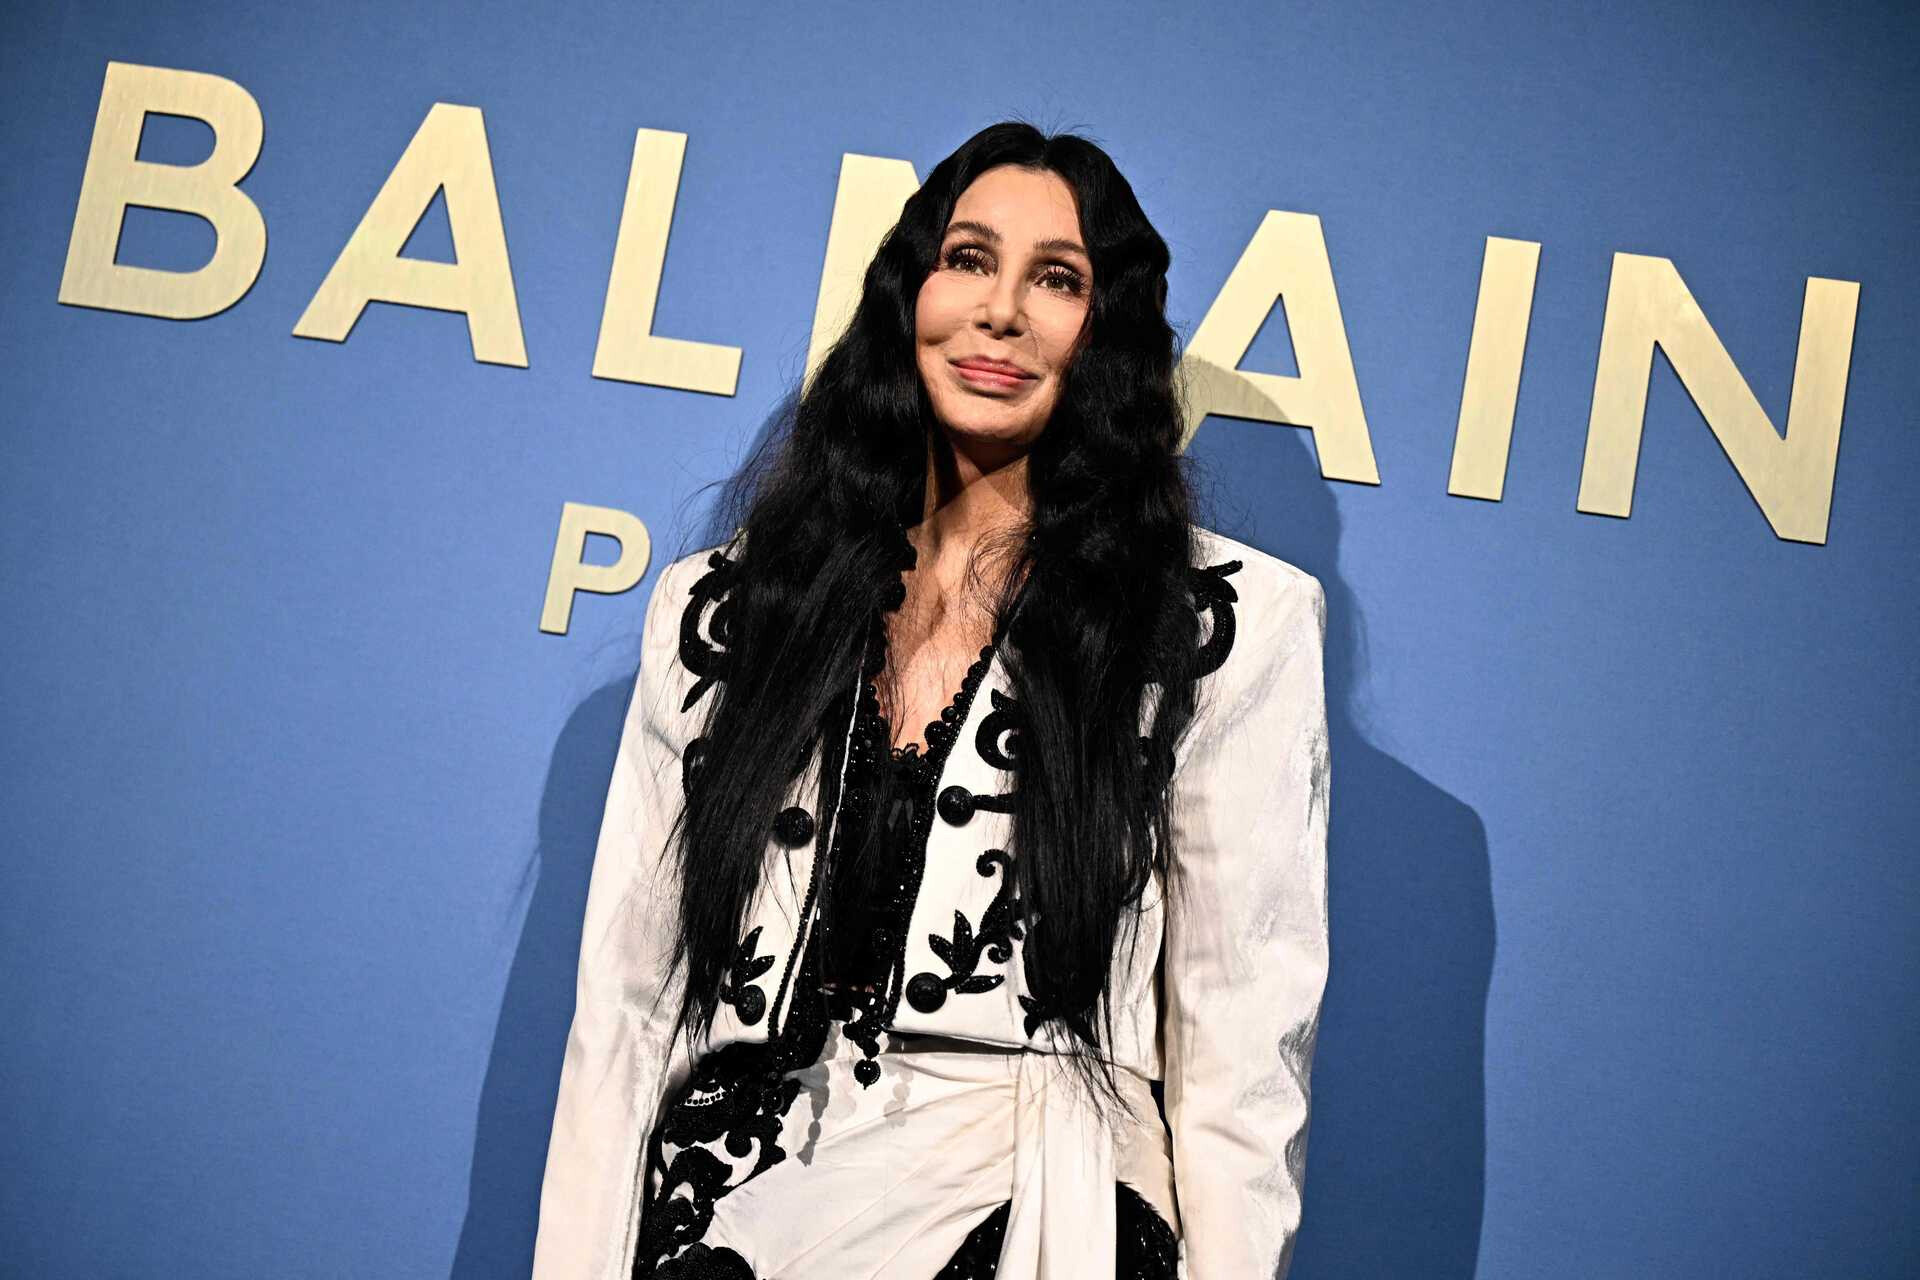 Singer Cher is filing for guardianship of her 47-year-old son